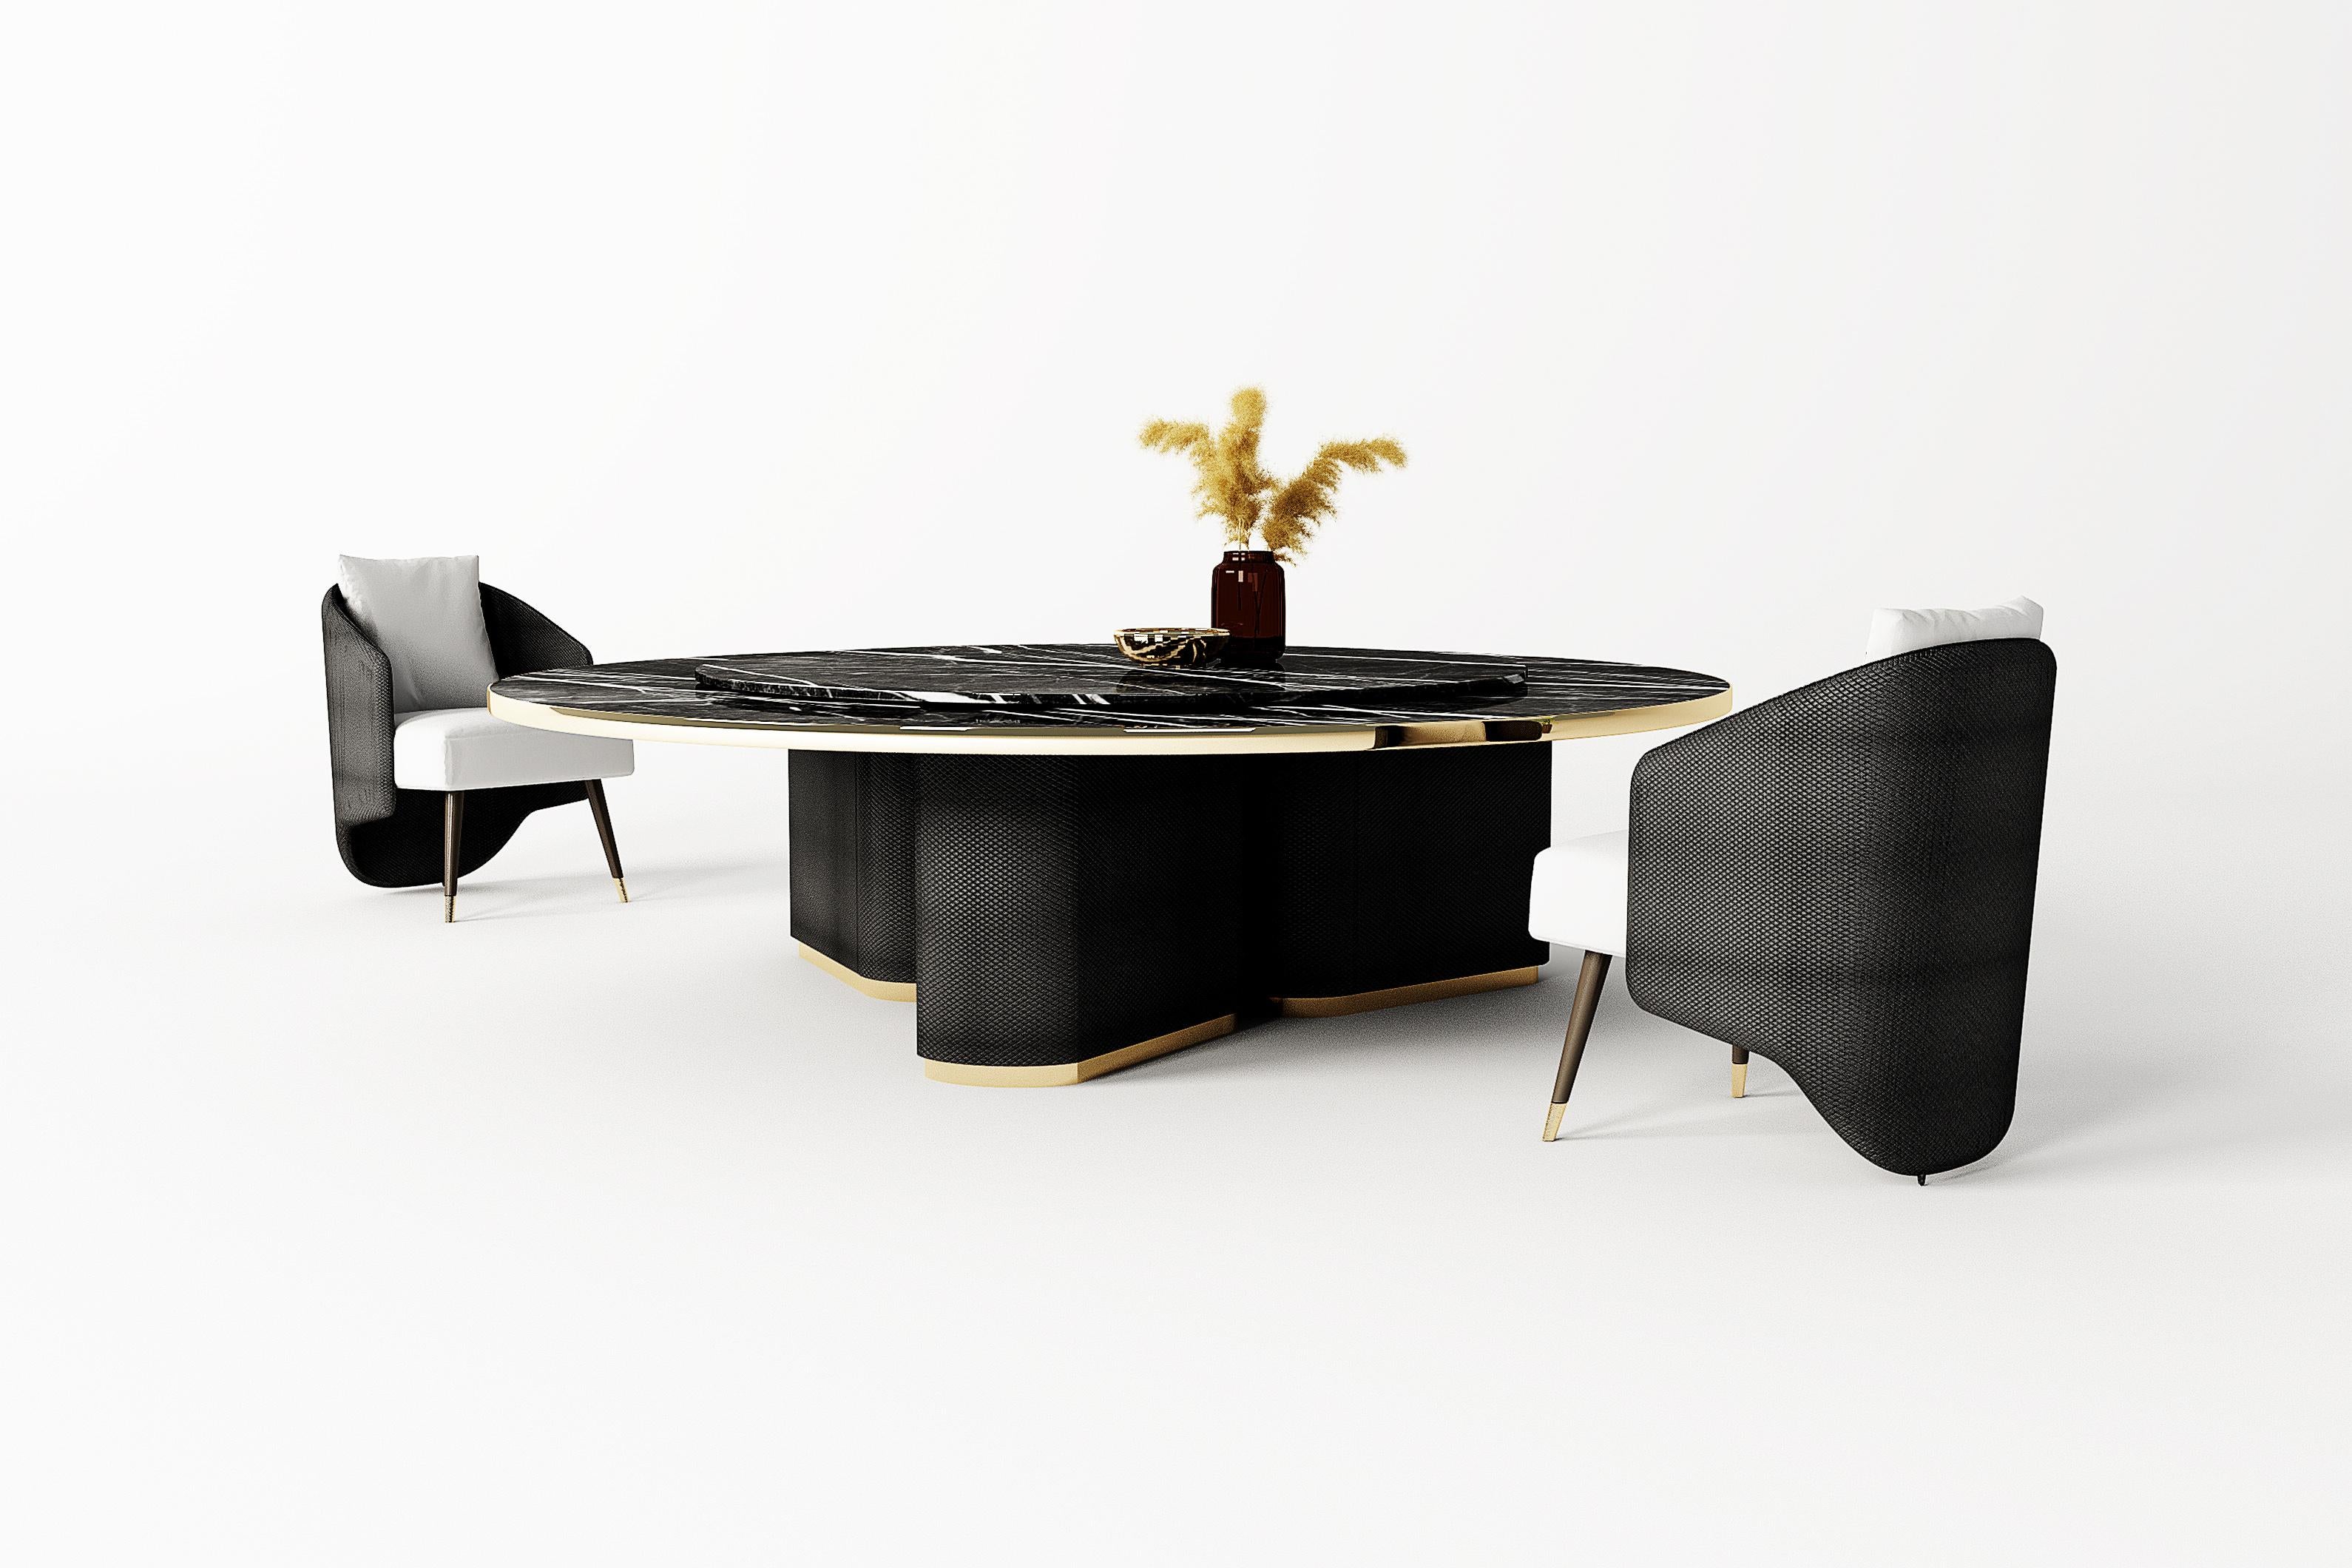 A unique table of significant size with its 280 cm diameter. The three legs covered in black woven leather are supported by a matte gold-finish steel base. The top, detailed lazy susan motion controlled by remote control, makes Fabian a stunning